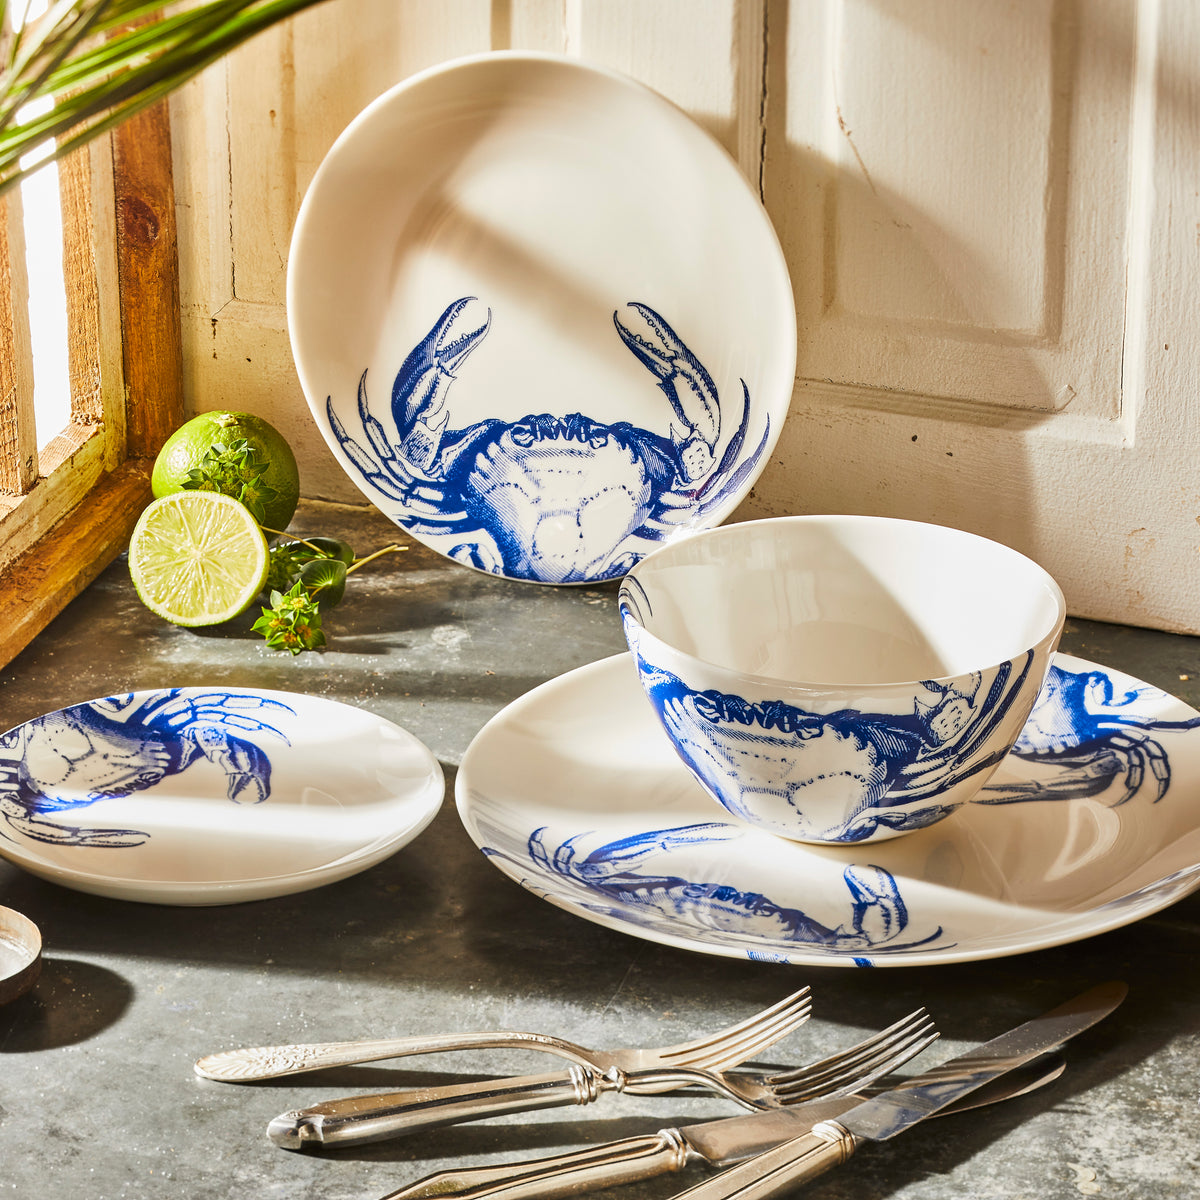 Caskata&#39;s Crab Collection is displayed in a sunny window and includes a salad, dinner and canapé plate as well as cereal bowl. The creamy white porcelain is decorated with playful blue crabs. Limes, vintage flatware and rustic woodwork make for an eye catching display.